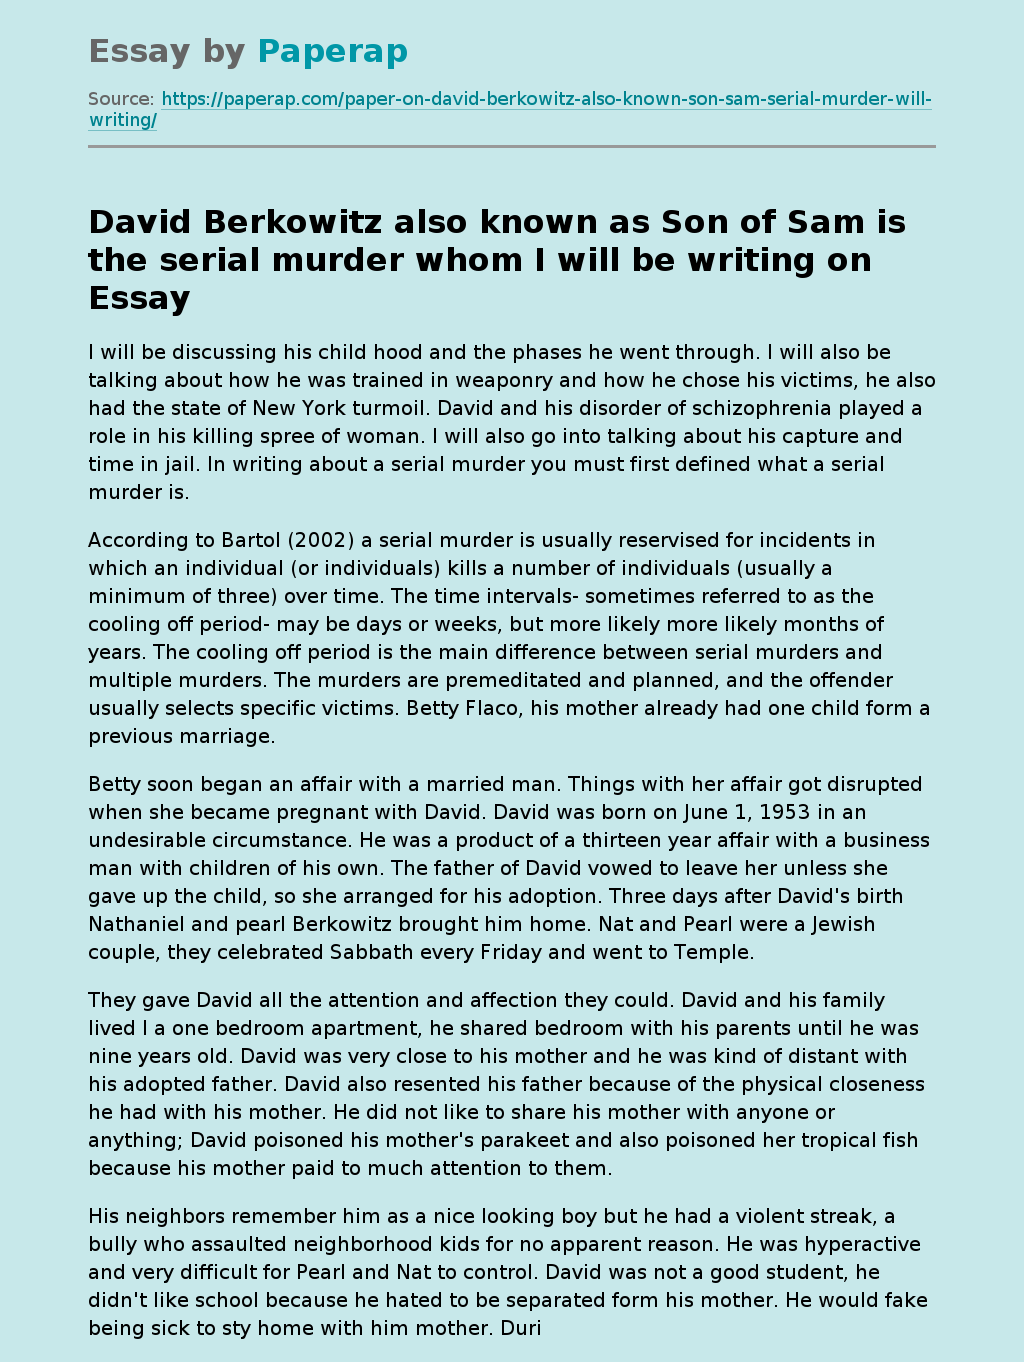 David Berkowitz also known as Son of Sam is the serial murder whom I will be writing on